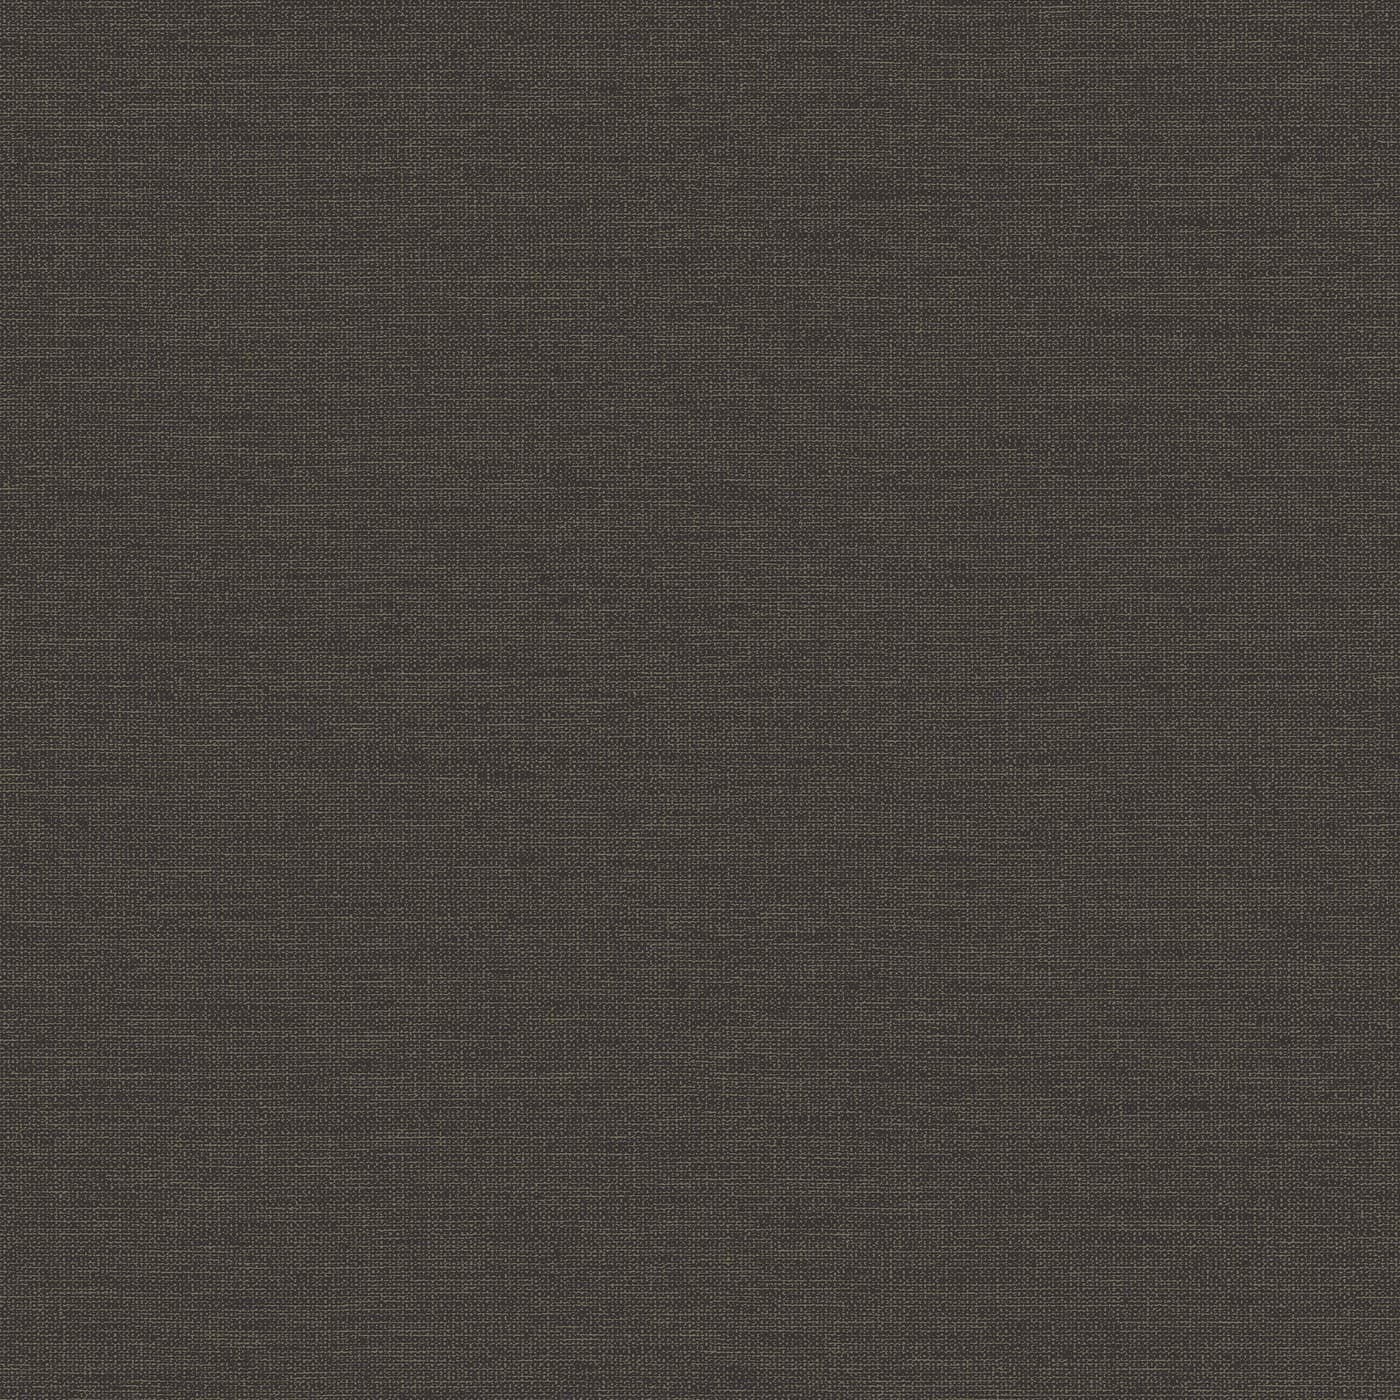 Heritage Texture Charcoal/Gold Wallpaper 122426 by Superfresco Easy